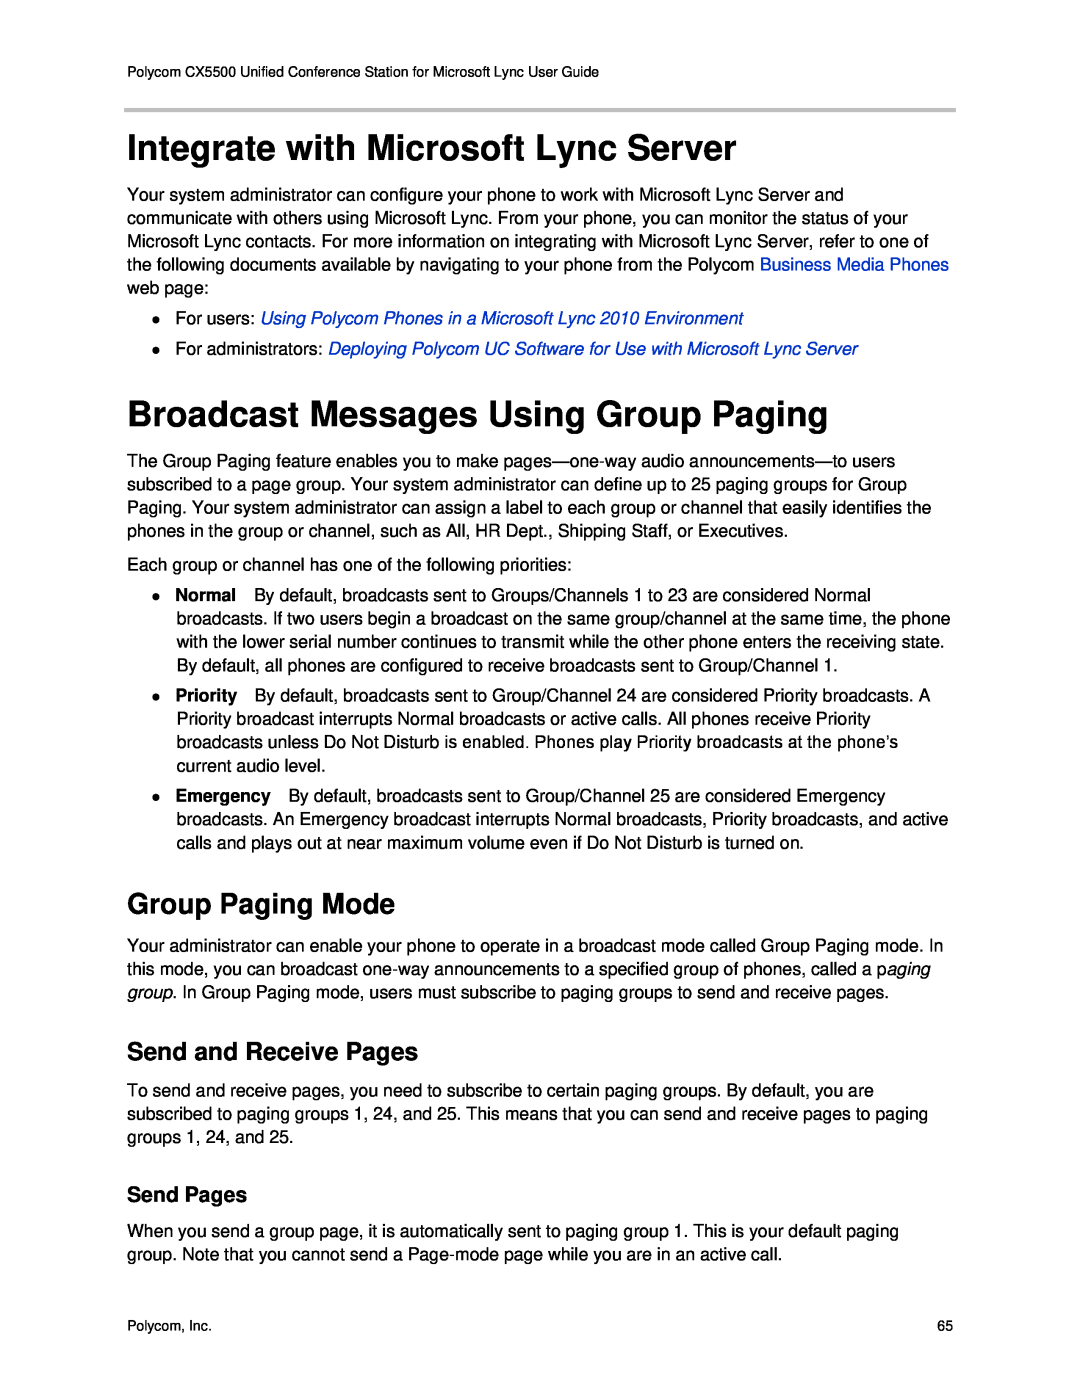 Polycom CX5500 Integrate with Microsoft Lync Server, Broadcast Messages Using Group Paging, Group Paging Mode, Send Pages 